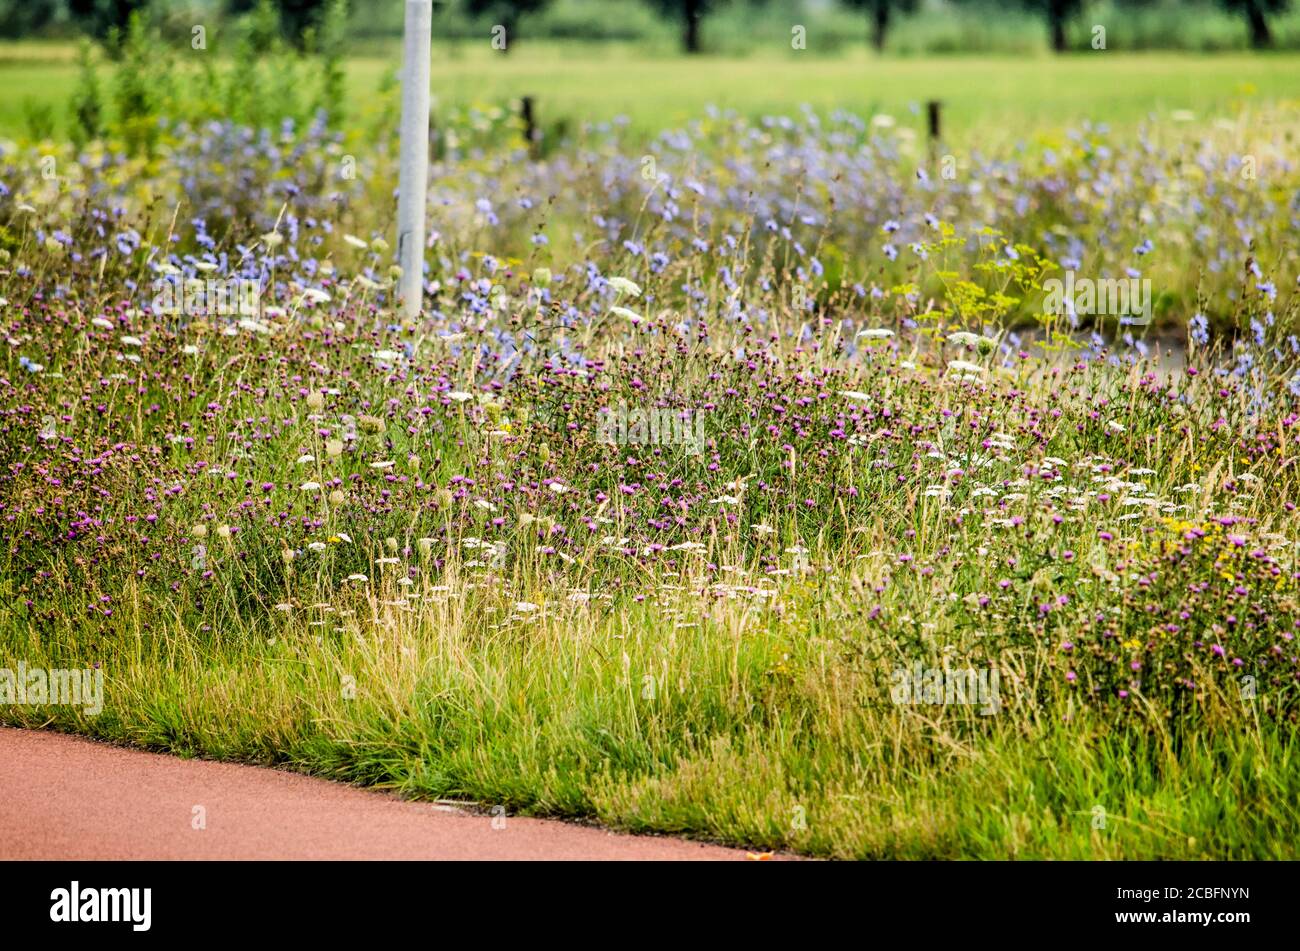 Wildflowers, including clover and chicory grow abundantly by the side of a red asphalt bicycle lane  in summer in the town of Zwolle, The Netherlands Stock Photo